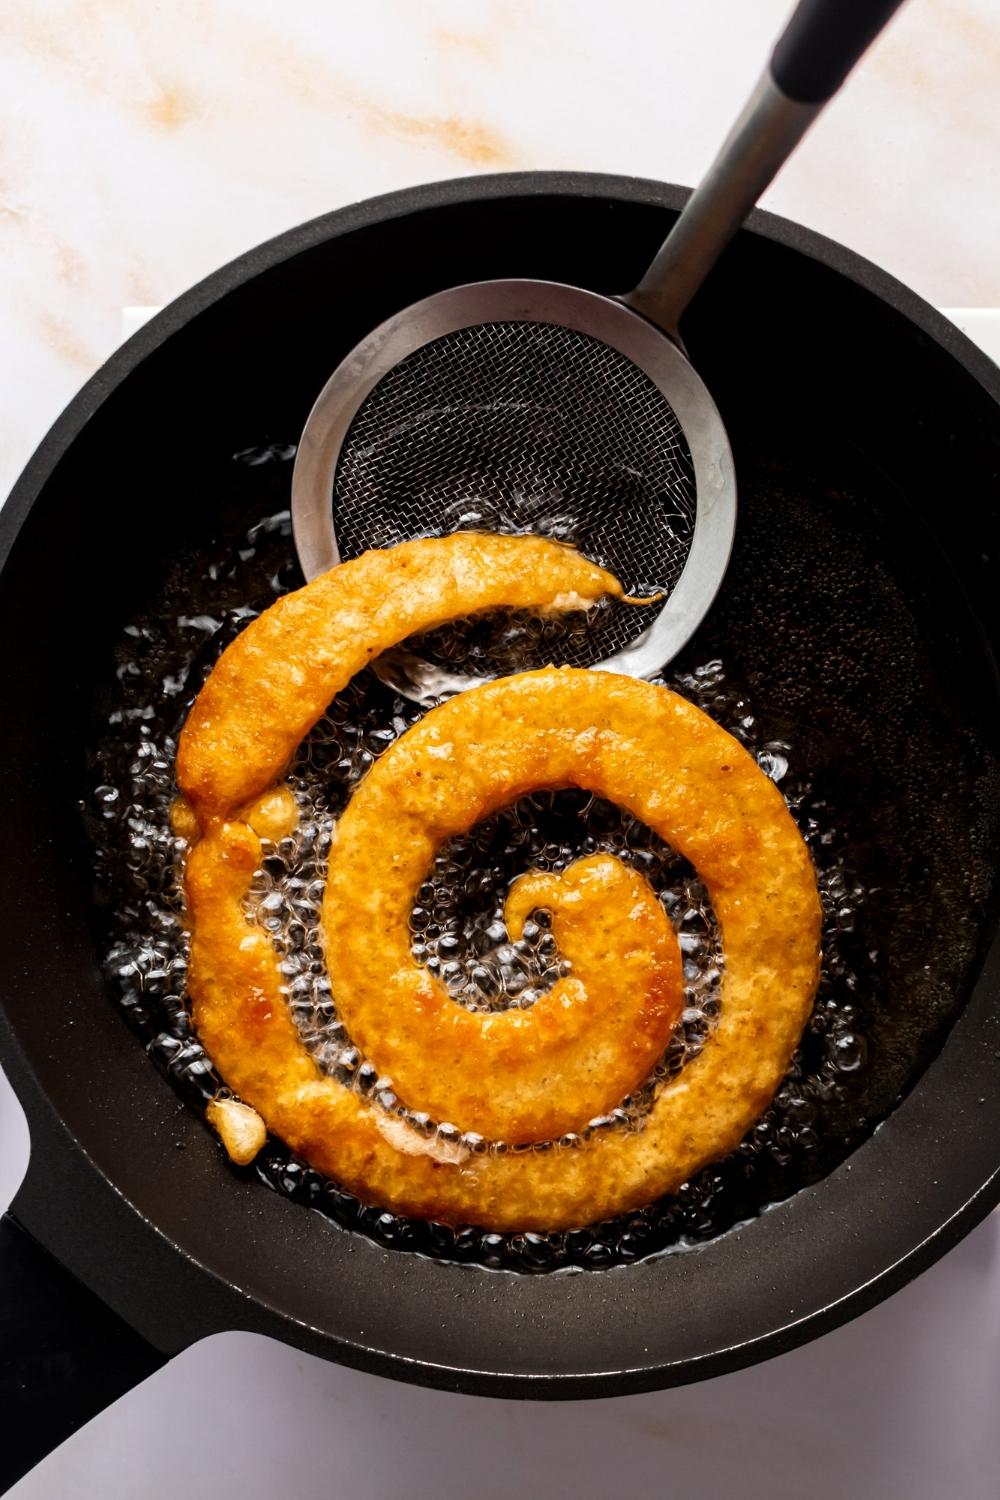 A fried funnel cake in a a pan that is filled with oil.